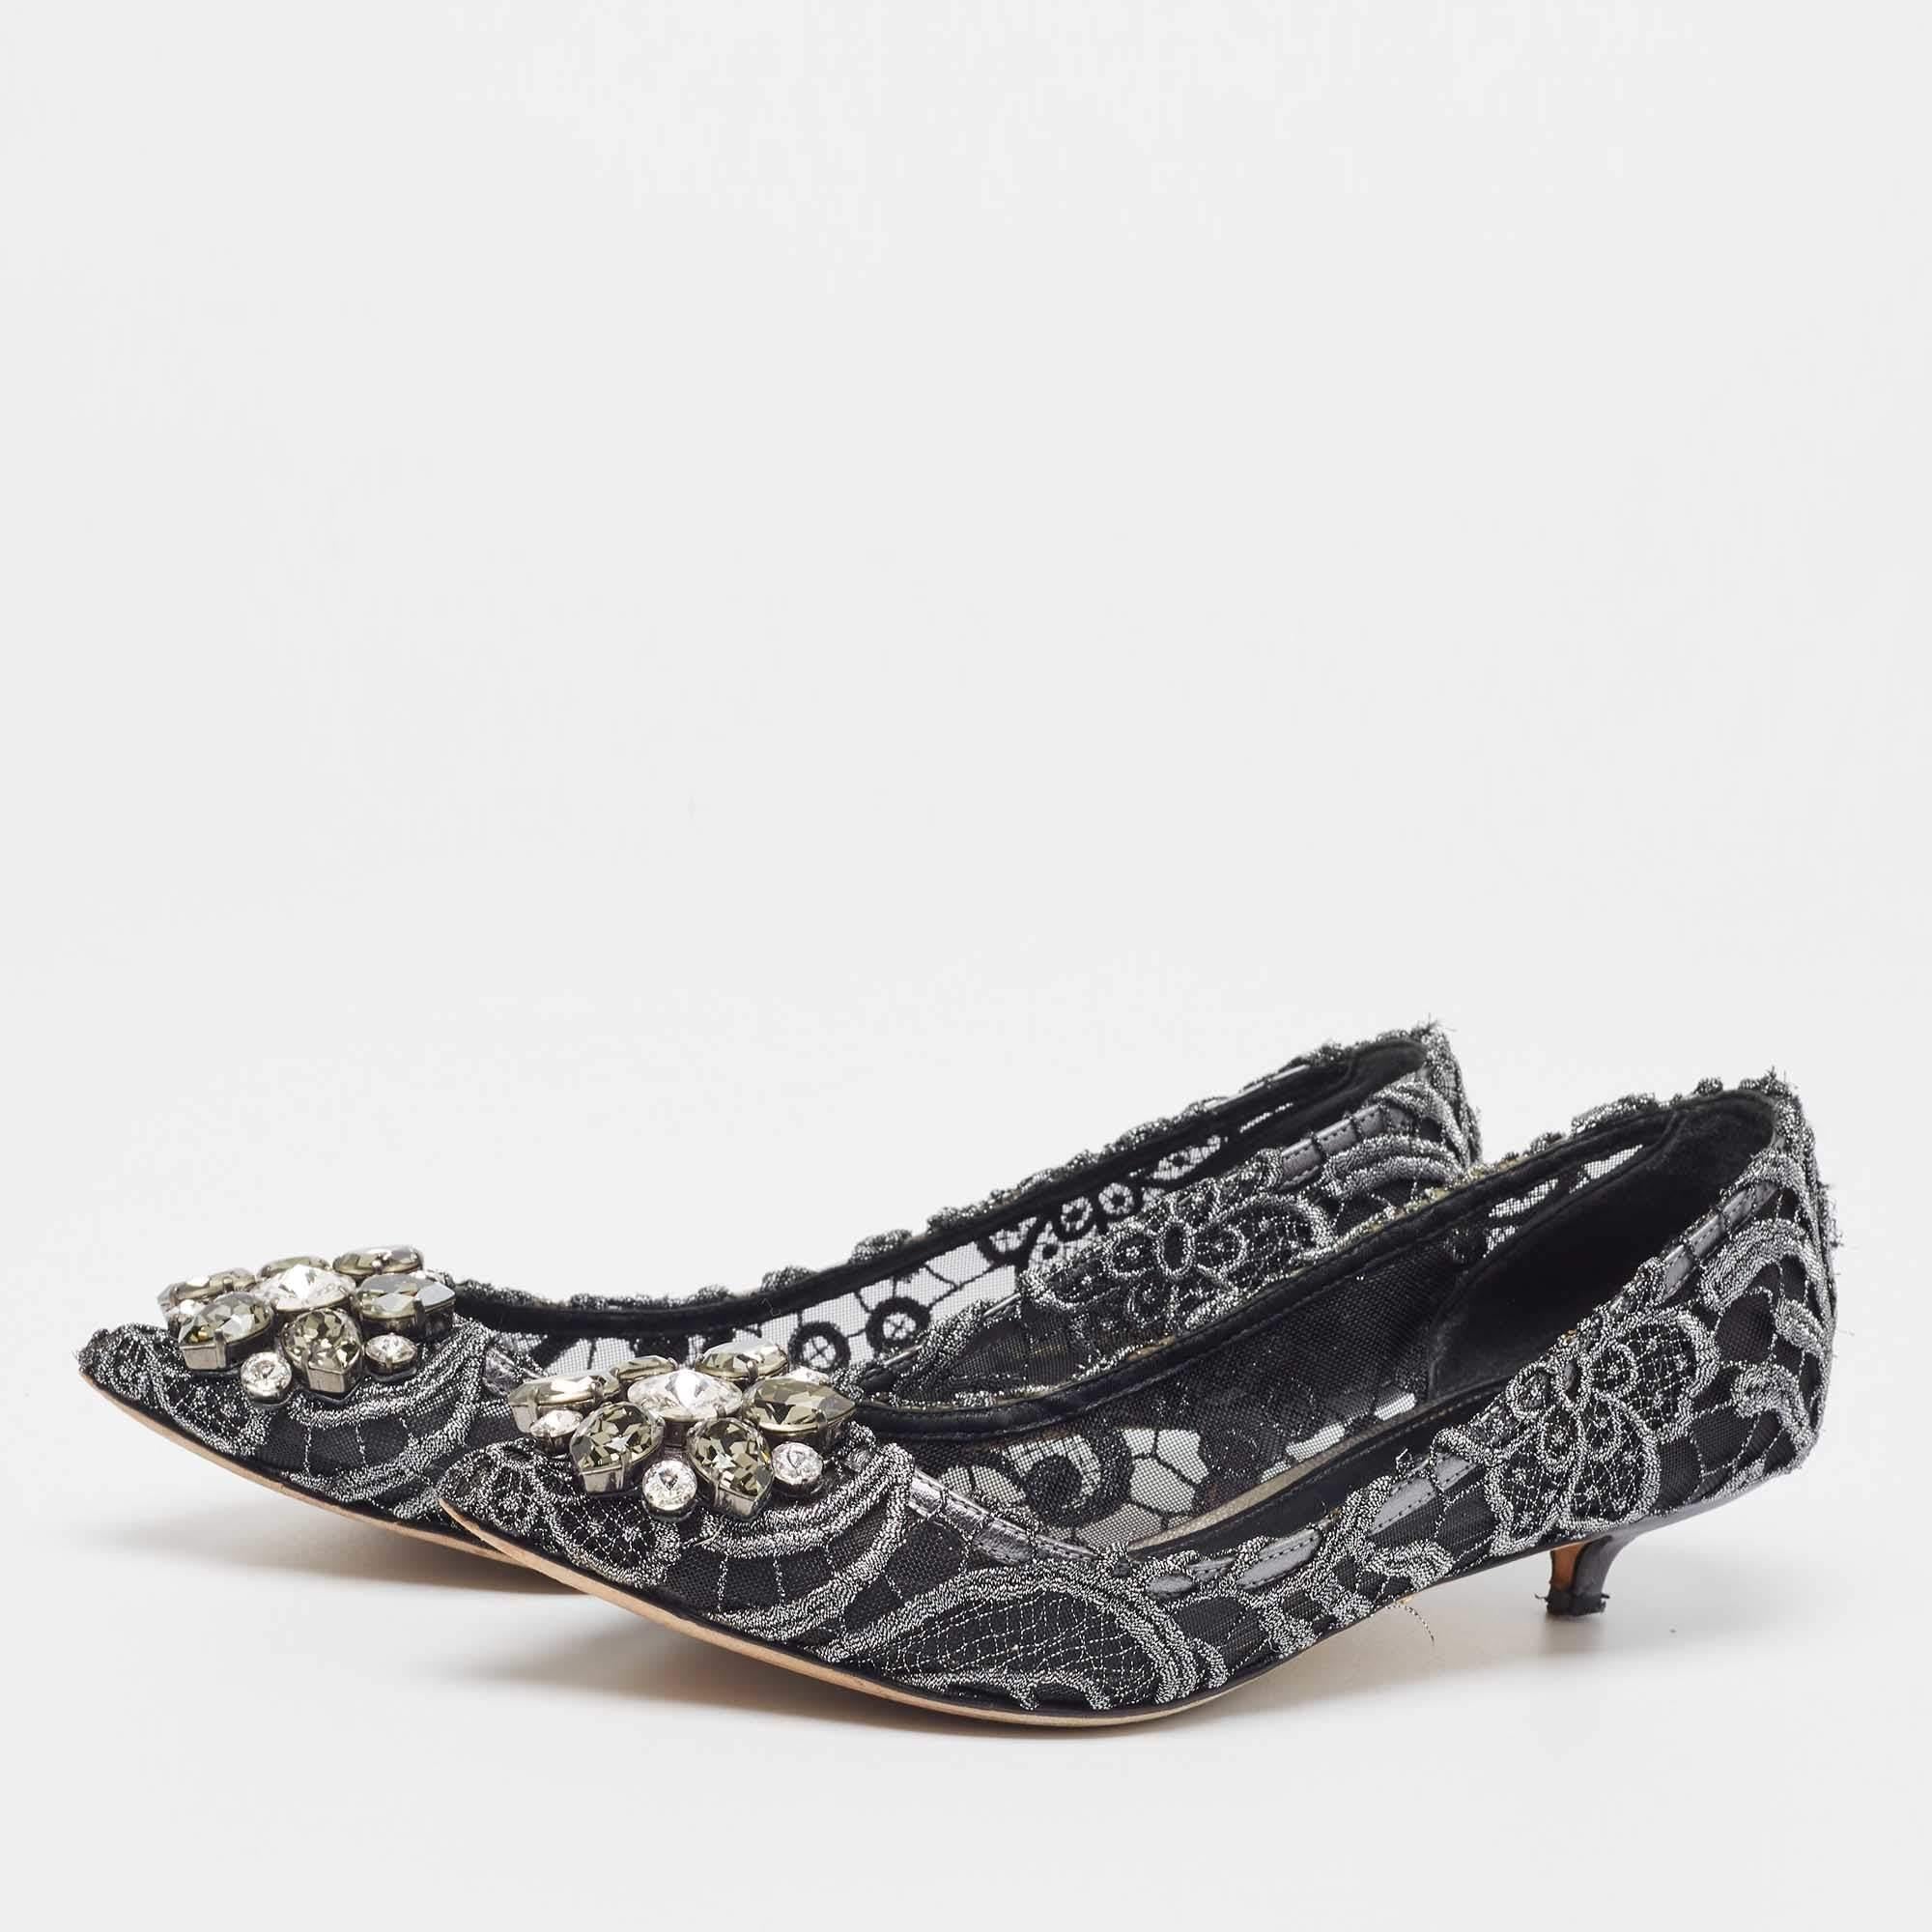 A vision of beauty, this pair of Dolce & Gabbana pumps embodies an appealing visual display. It is created from lace with a striking embellishment on the toes and it is uplifted on 5cm heels to offer you the perfect height along with comfort.

